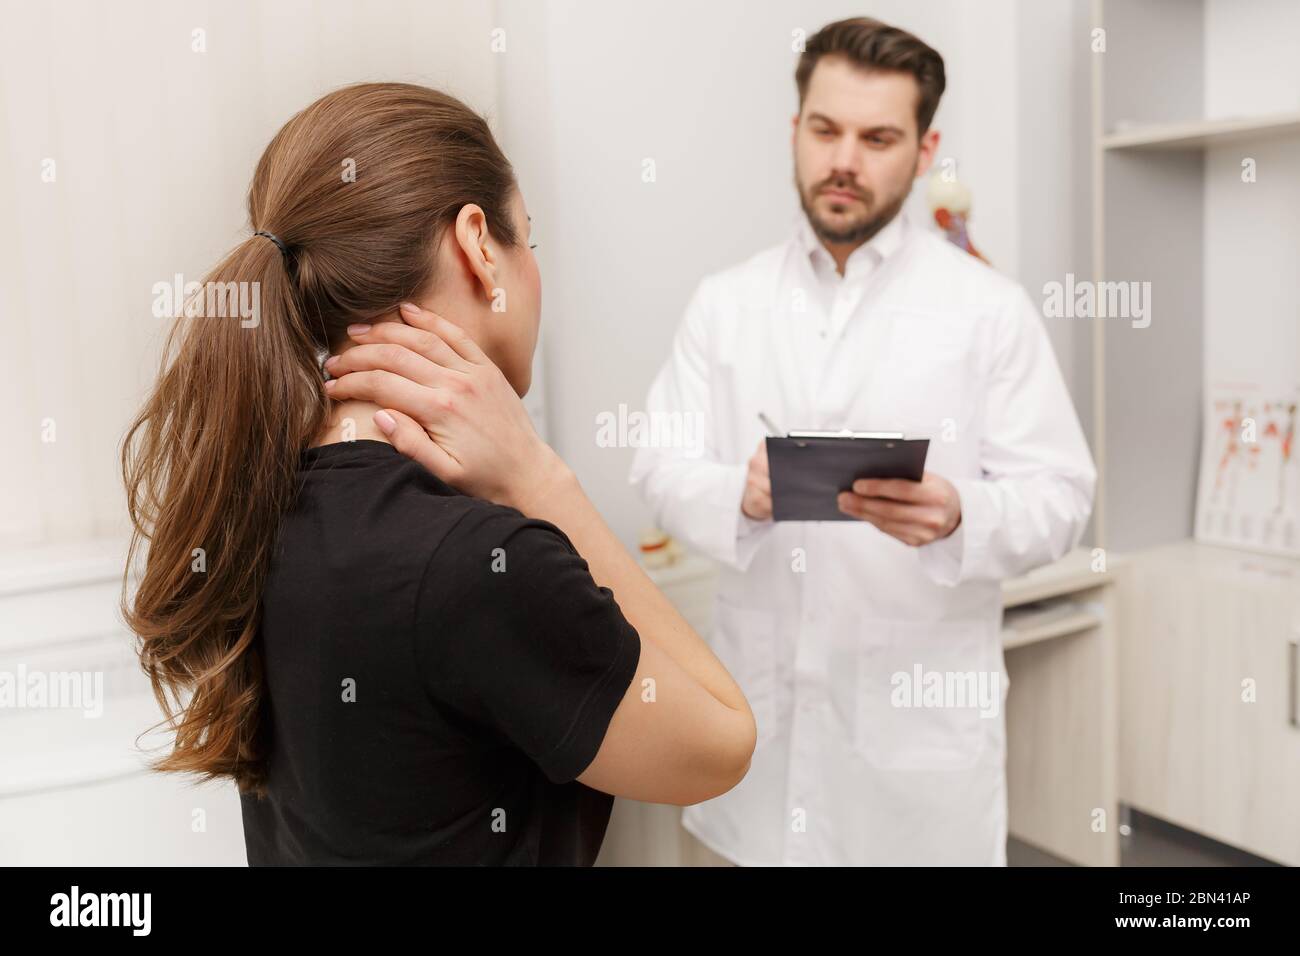 Male Doctor Examining Female Patient Suffering From Neck Pain Medical